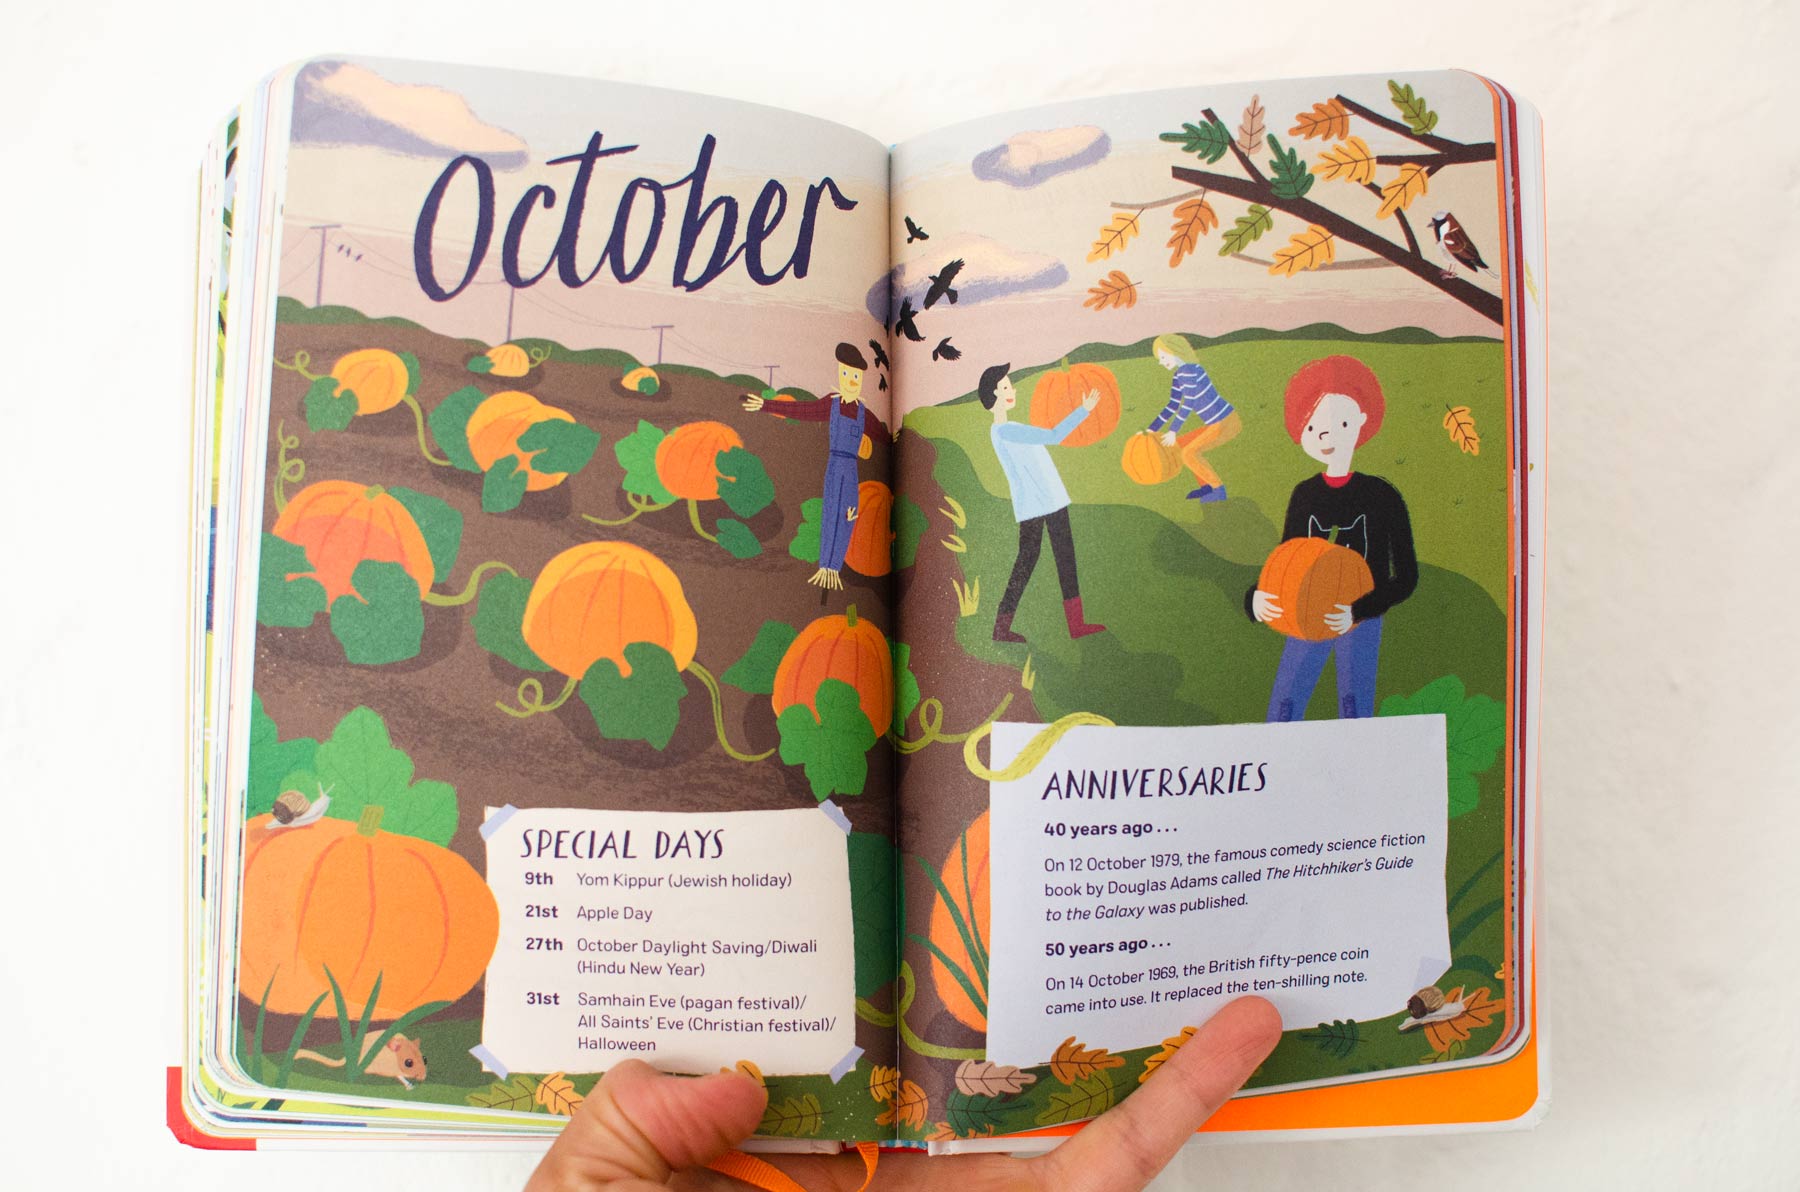 Double page spread from 2019: Nature Month by Month illustrated by Elly Jahnz.